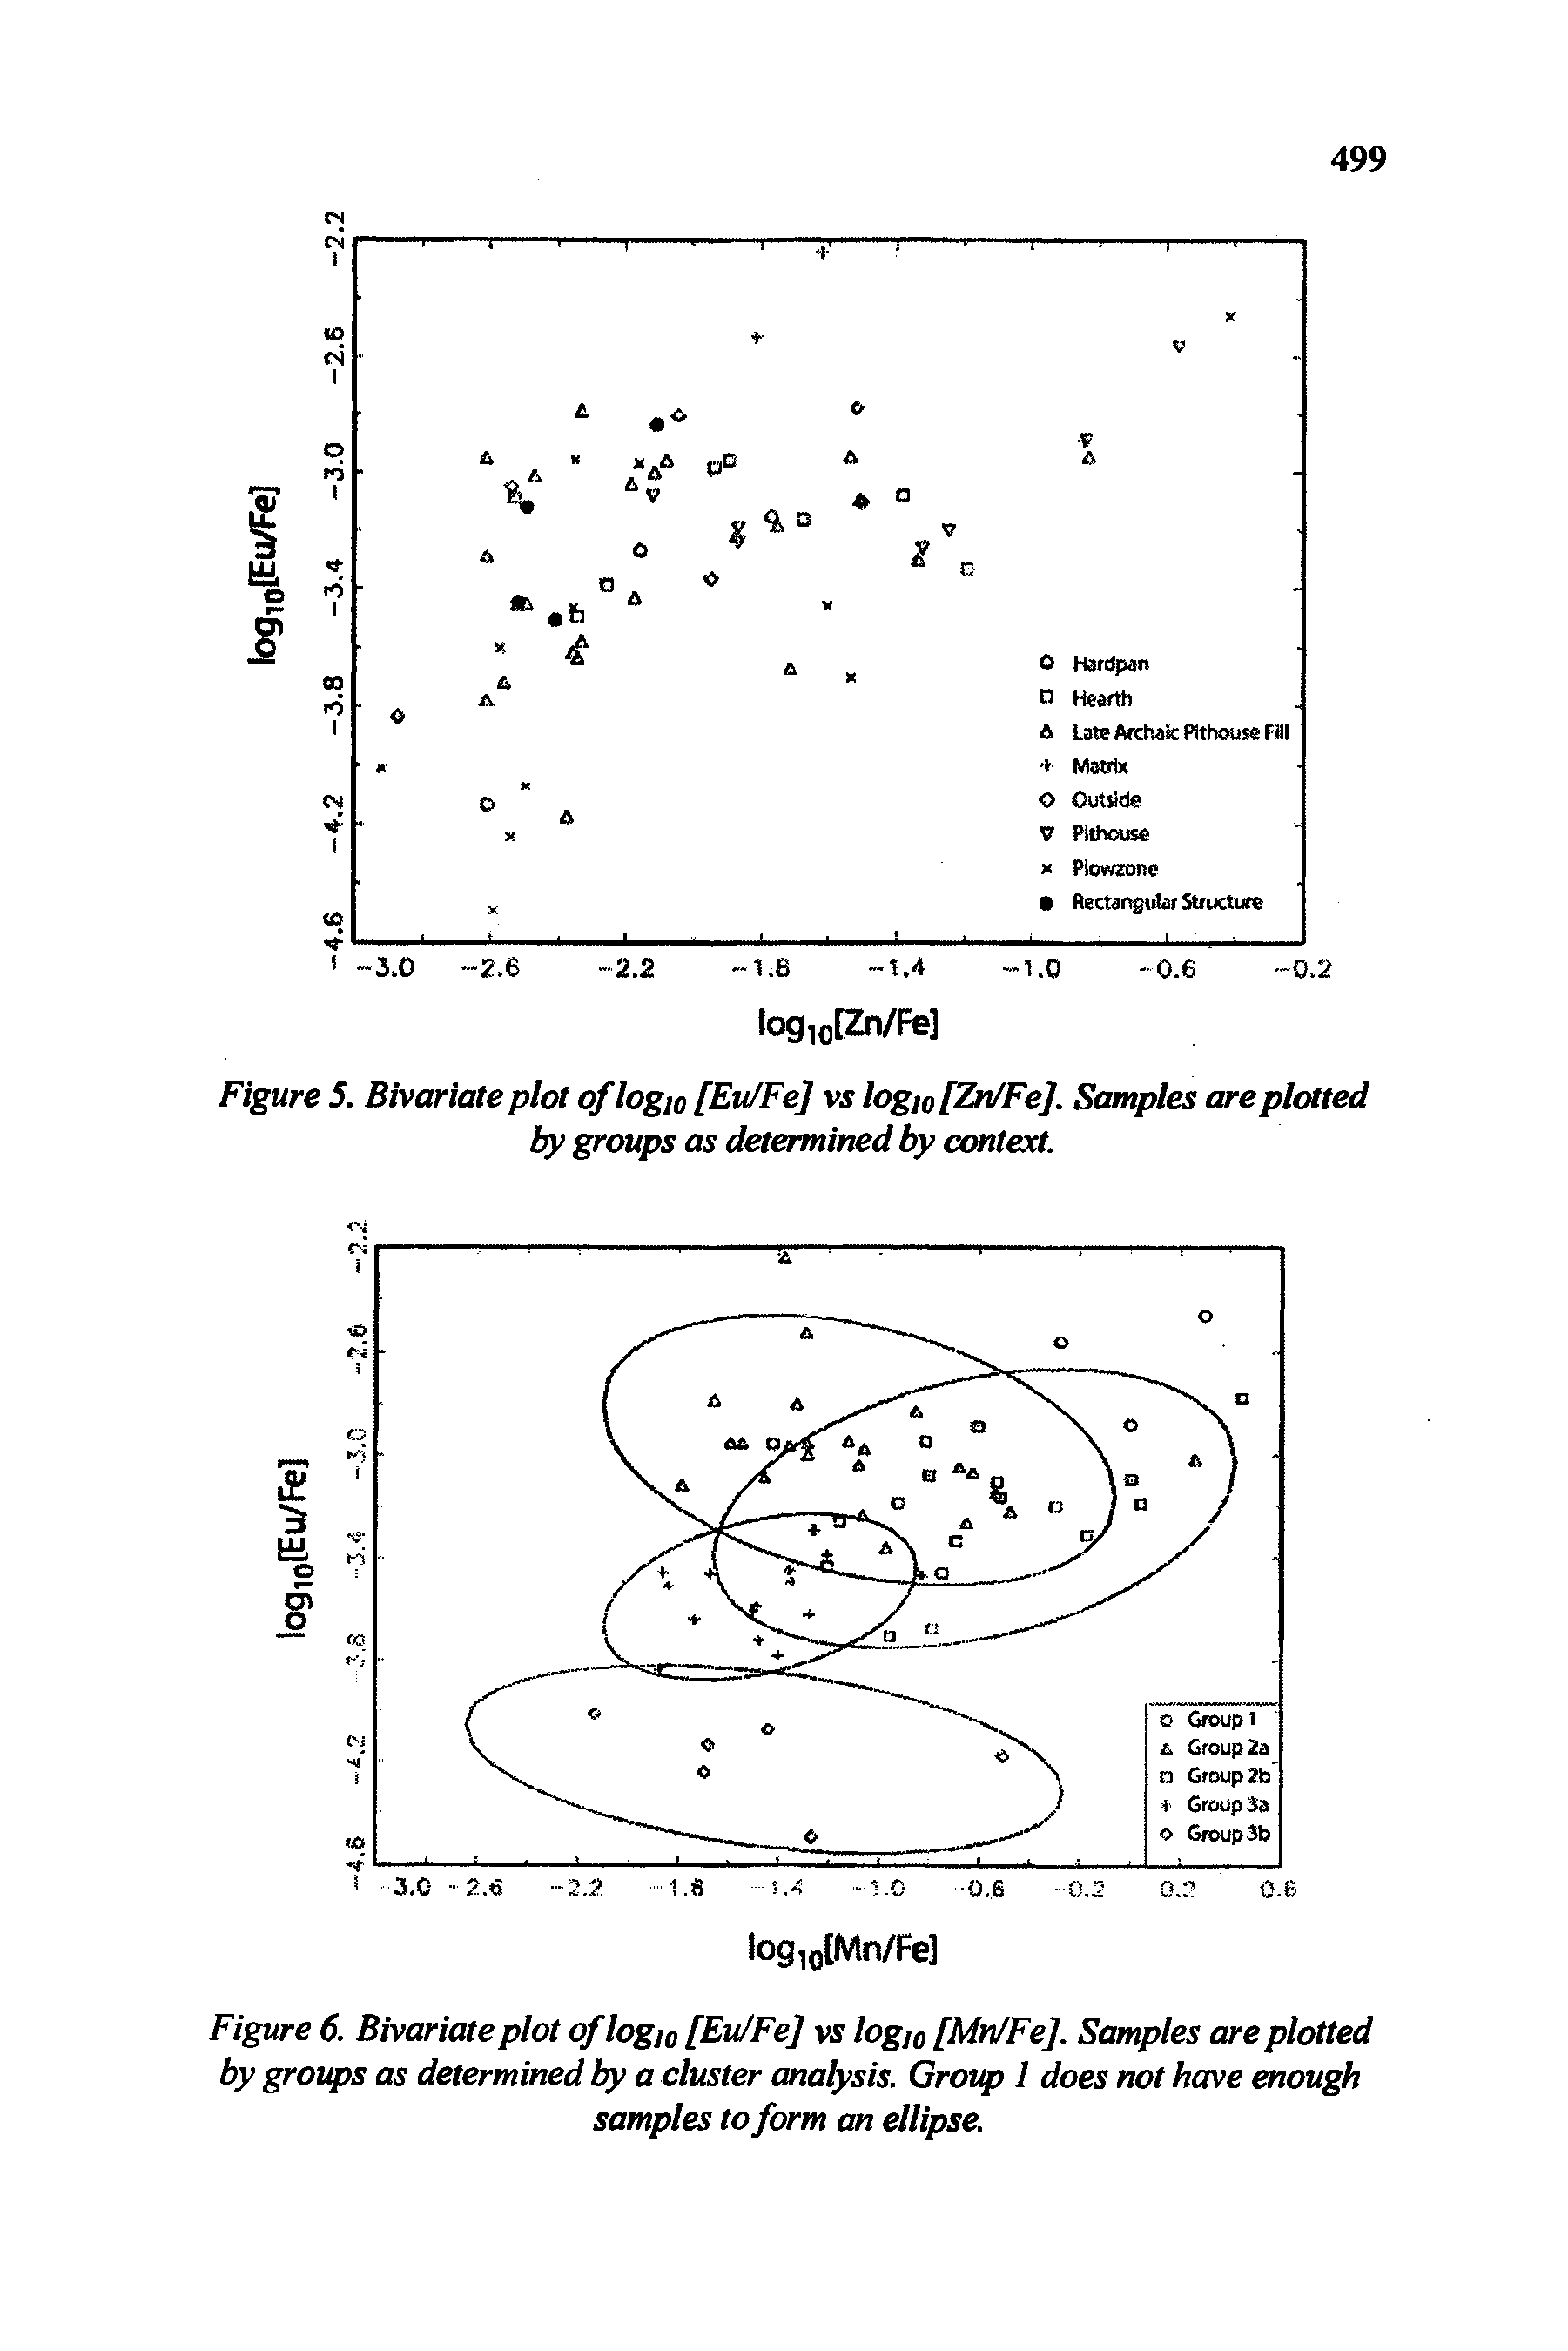 Figure 6. Bivariate plot of logic [Eu/Fe] vs logi0 [Mn/Fe], Samples are plotted by groups as determined by a cluster analysis. Group 1 does not have enough samples to form an ellipse.